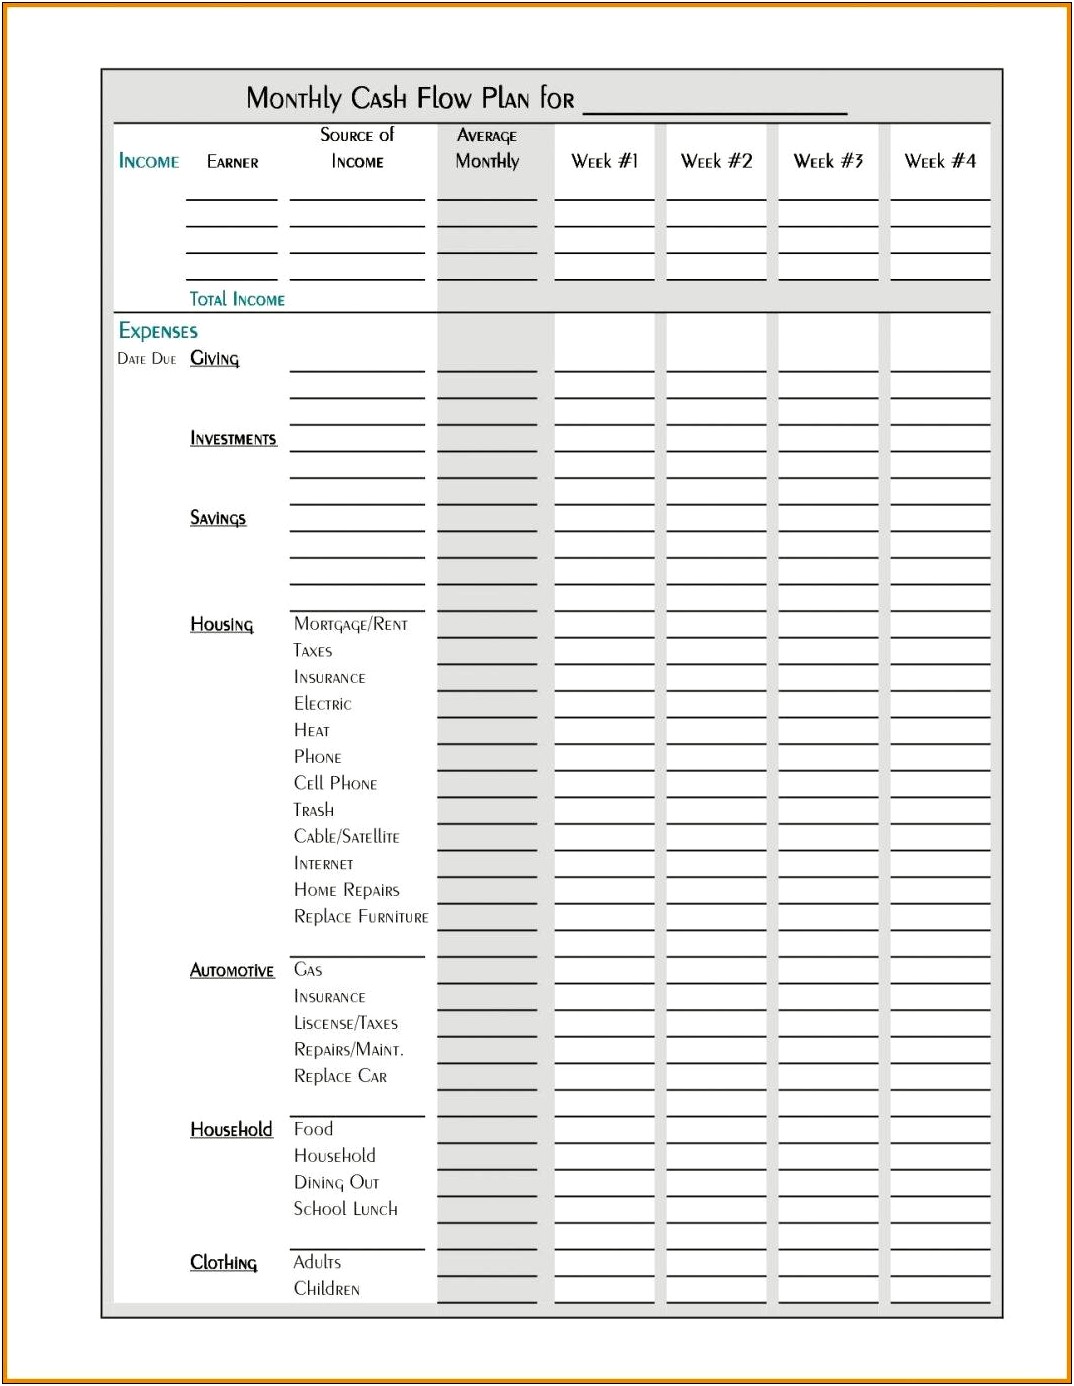 Monthly Business Expense Template Excel Free